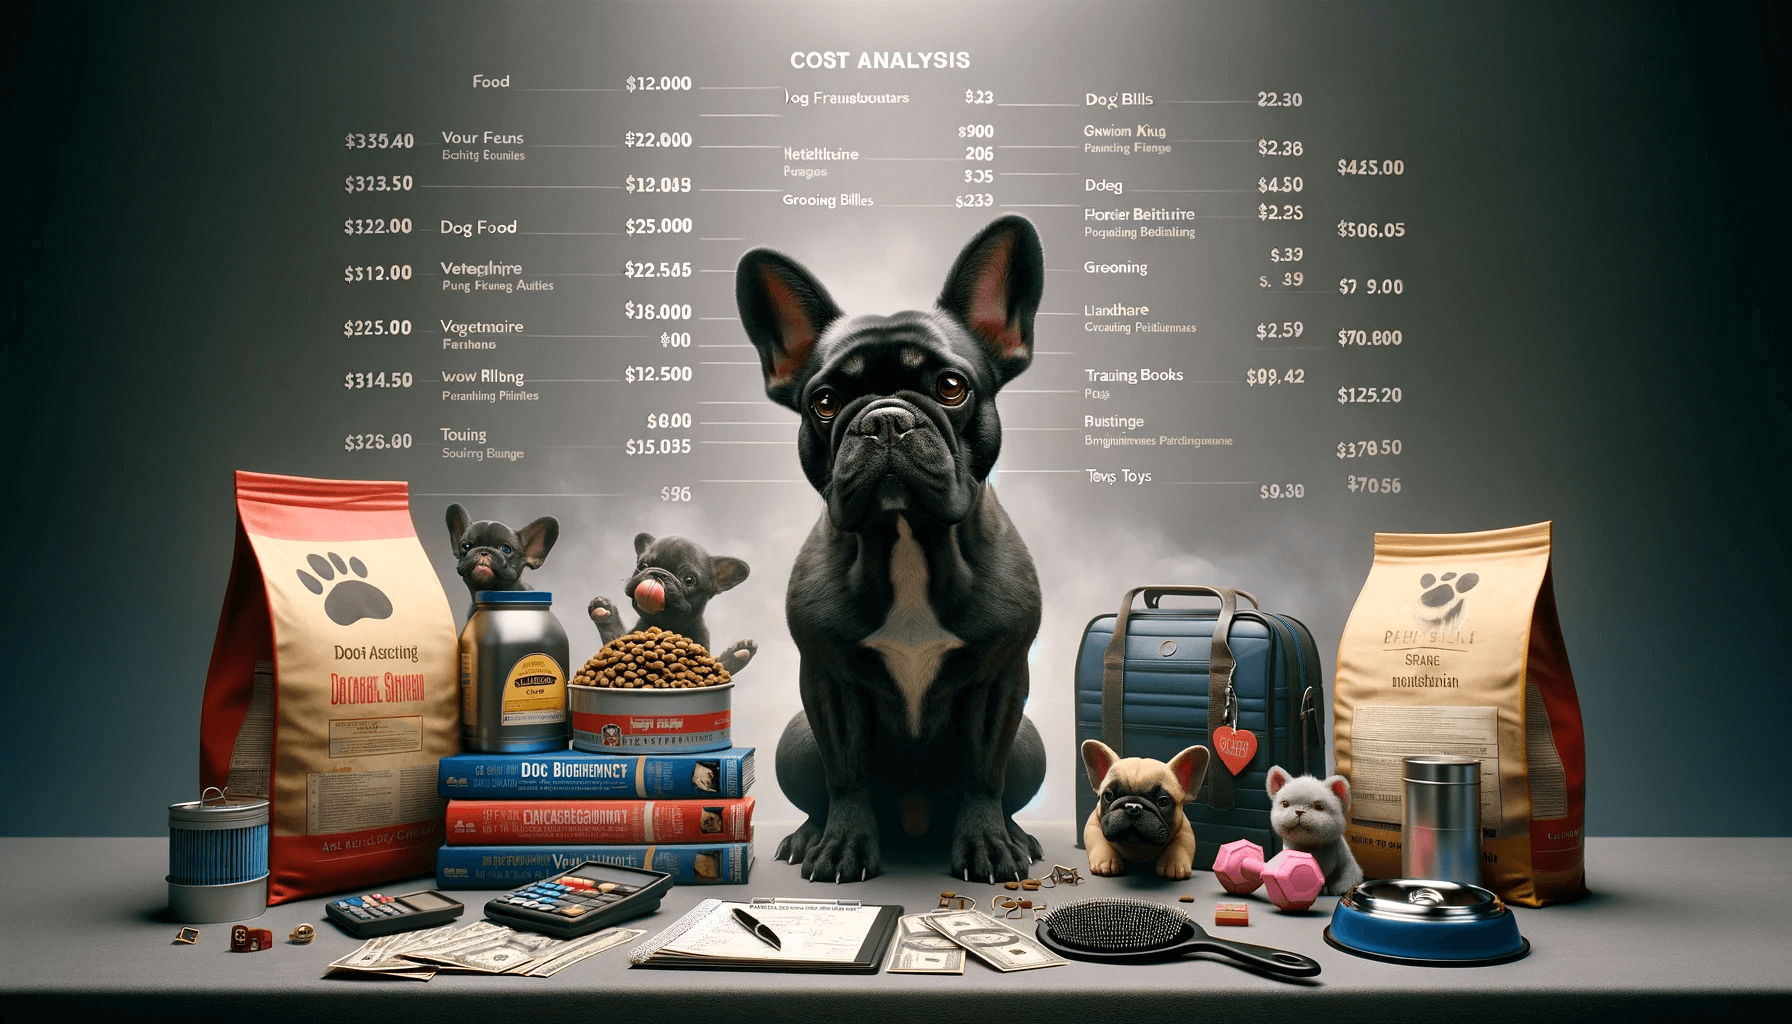 Cost Analysis for Owning a Black French Bulldog